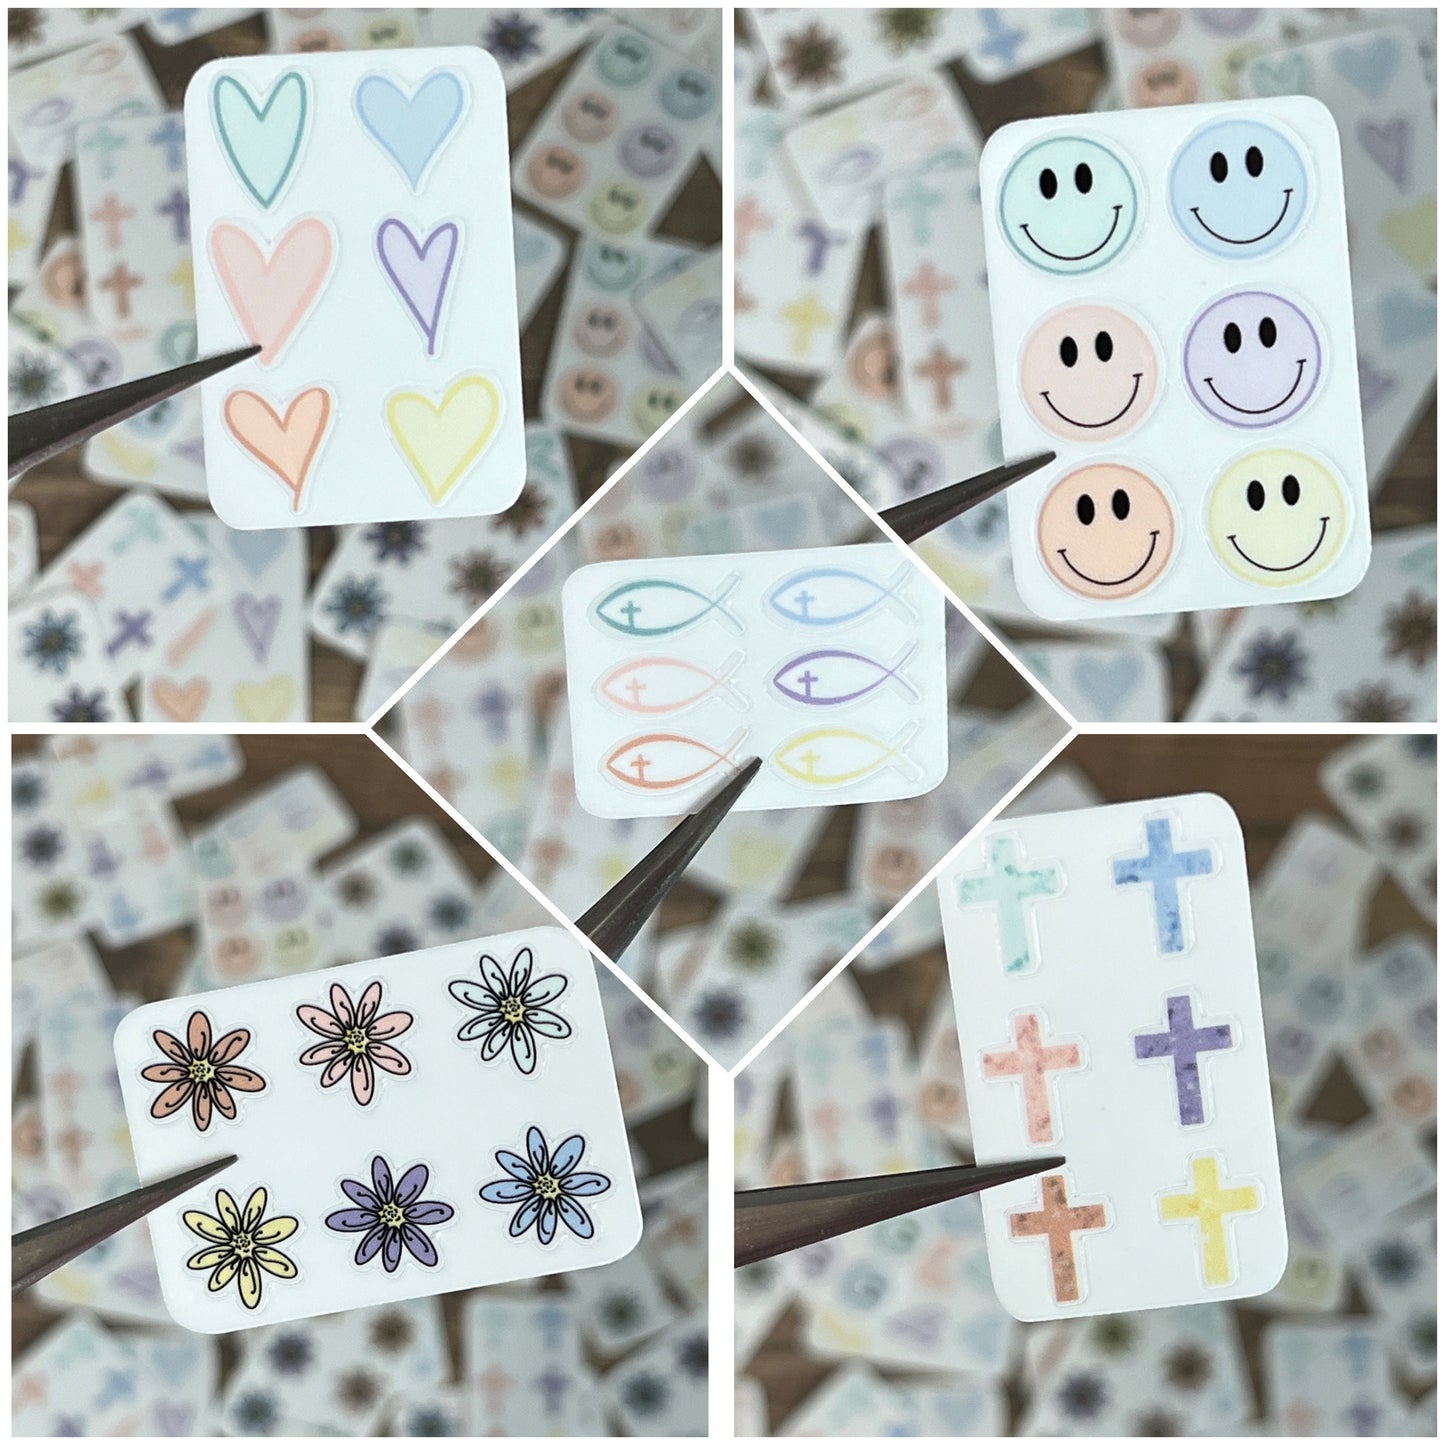 Tiny Stickers, 5 sheets, Journals, Planners | Choice of Design and Size | Heart, Cross, Happy Face, Christian Fish, Flower